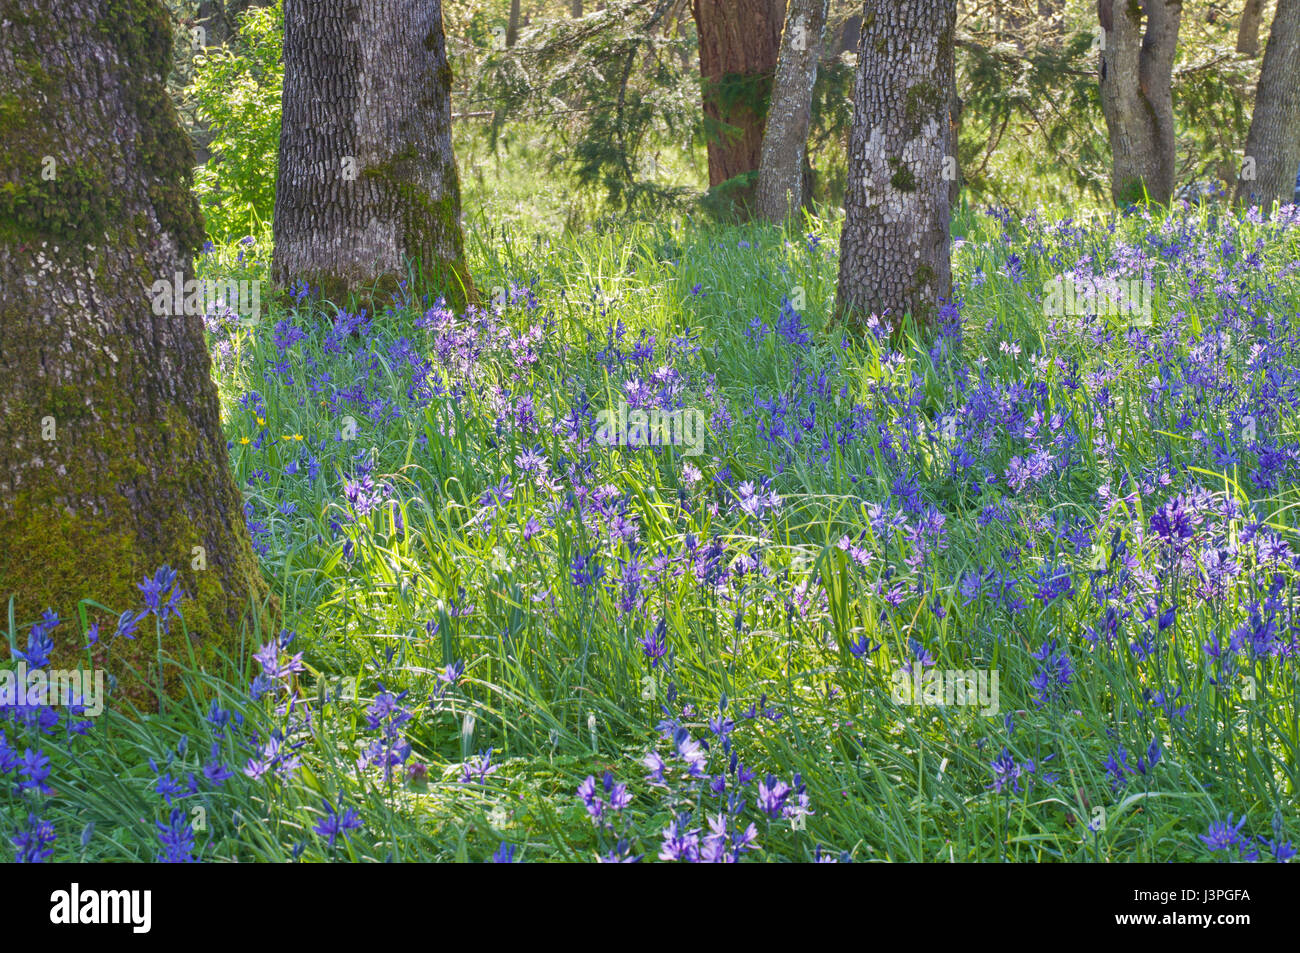 Blue Camas wildflowers blooming in the meadow among the oak trees in soft sunlight Stock Photo